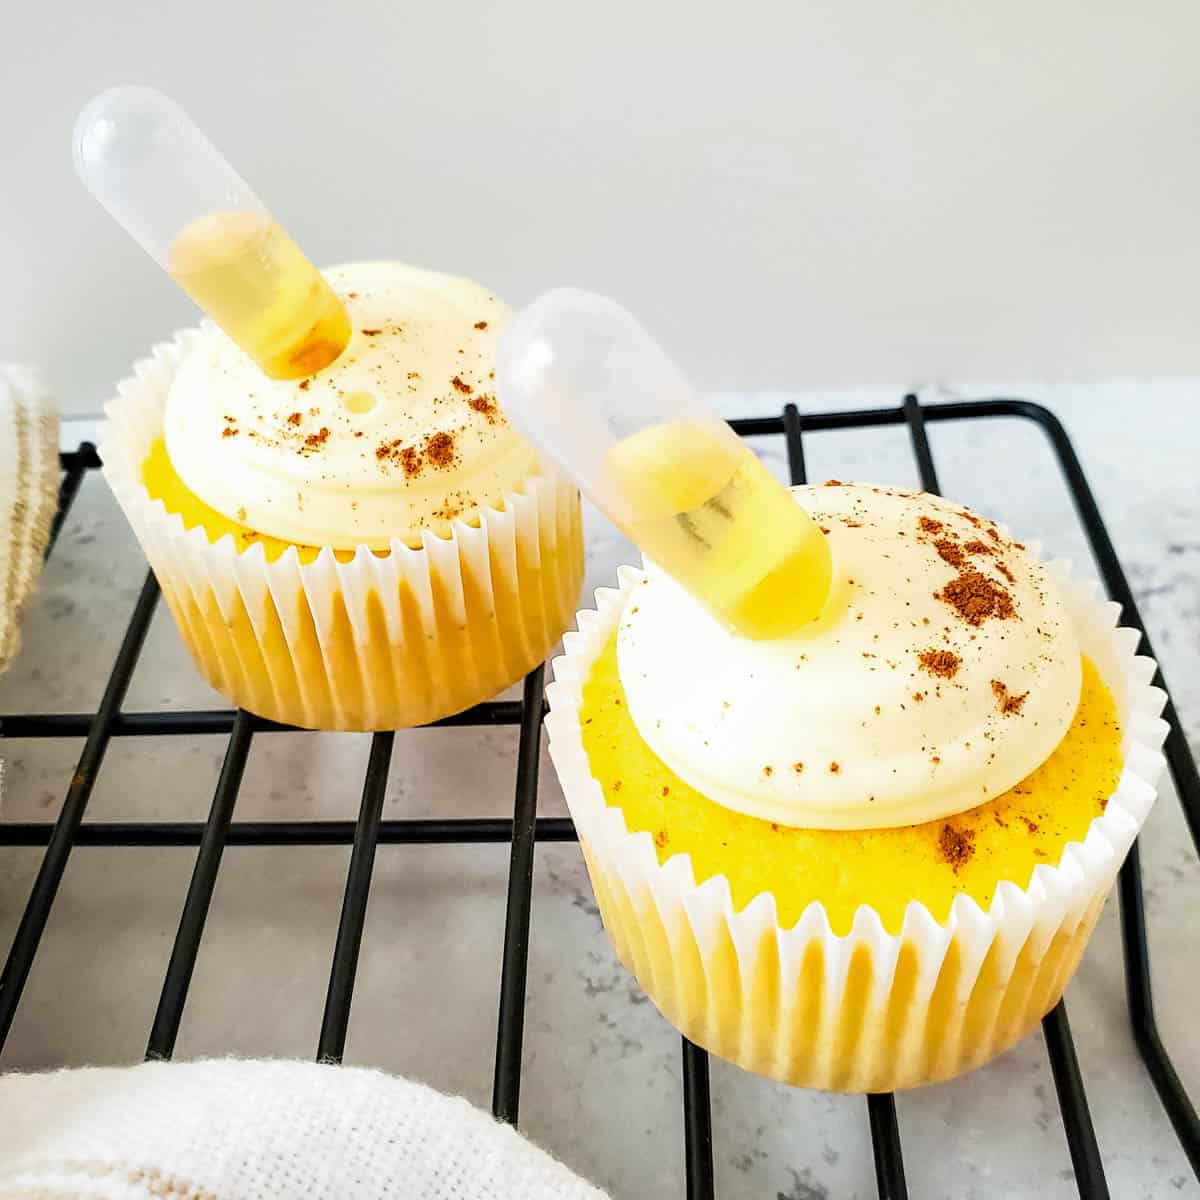 Easy to make spiced rum cupcakes with alcohol pipettes sticking out and a sprinkling of cinnamon on top on a wire cooling rack.